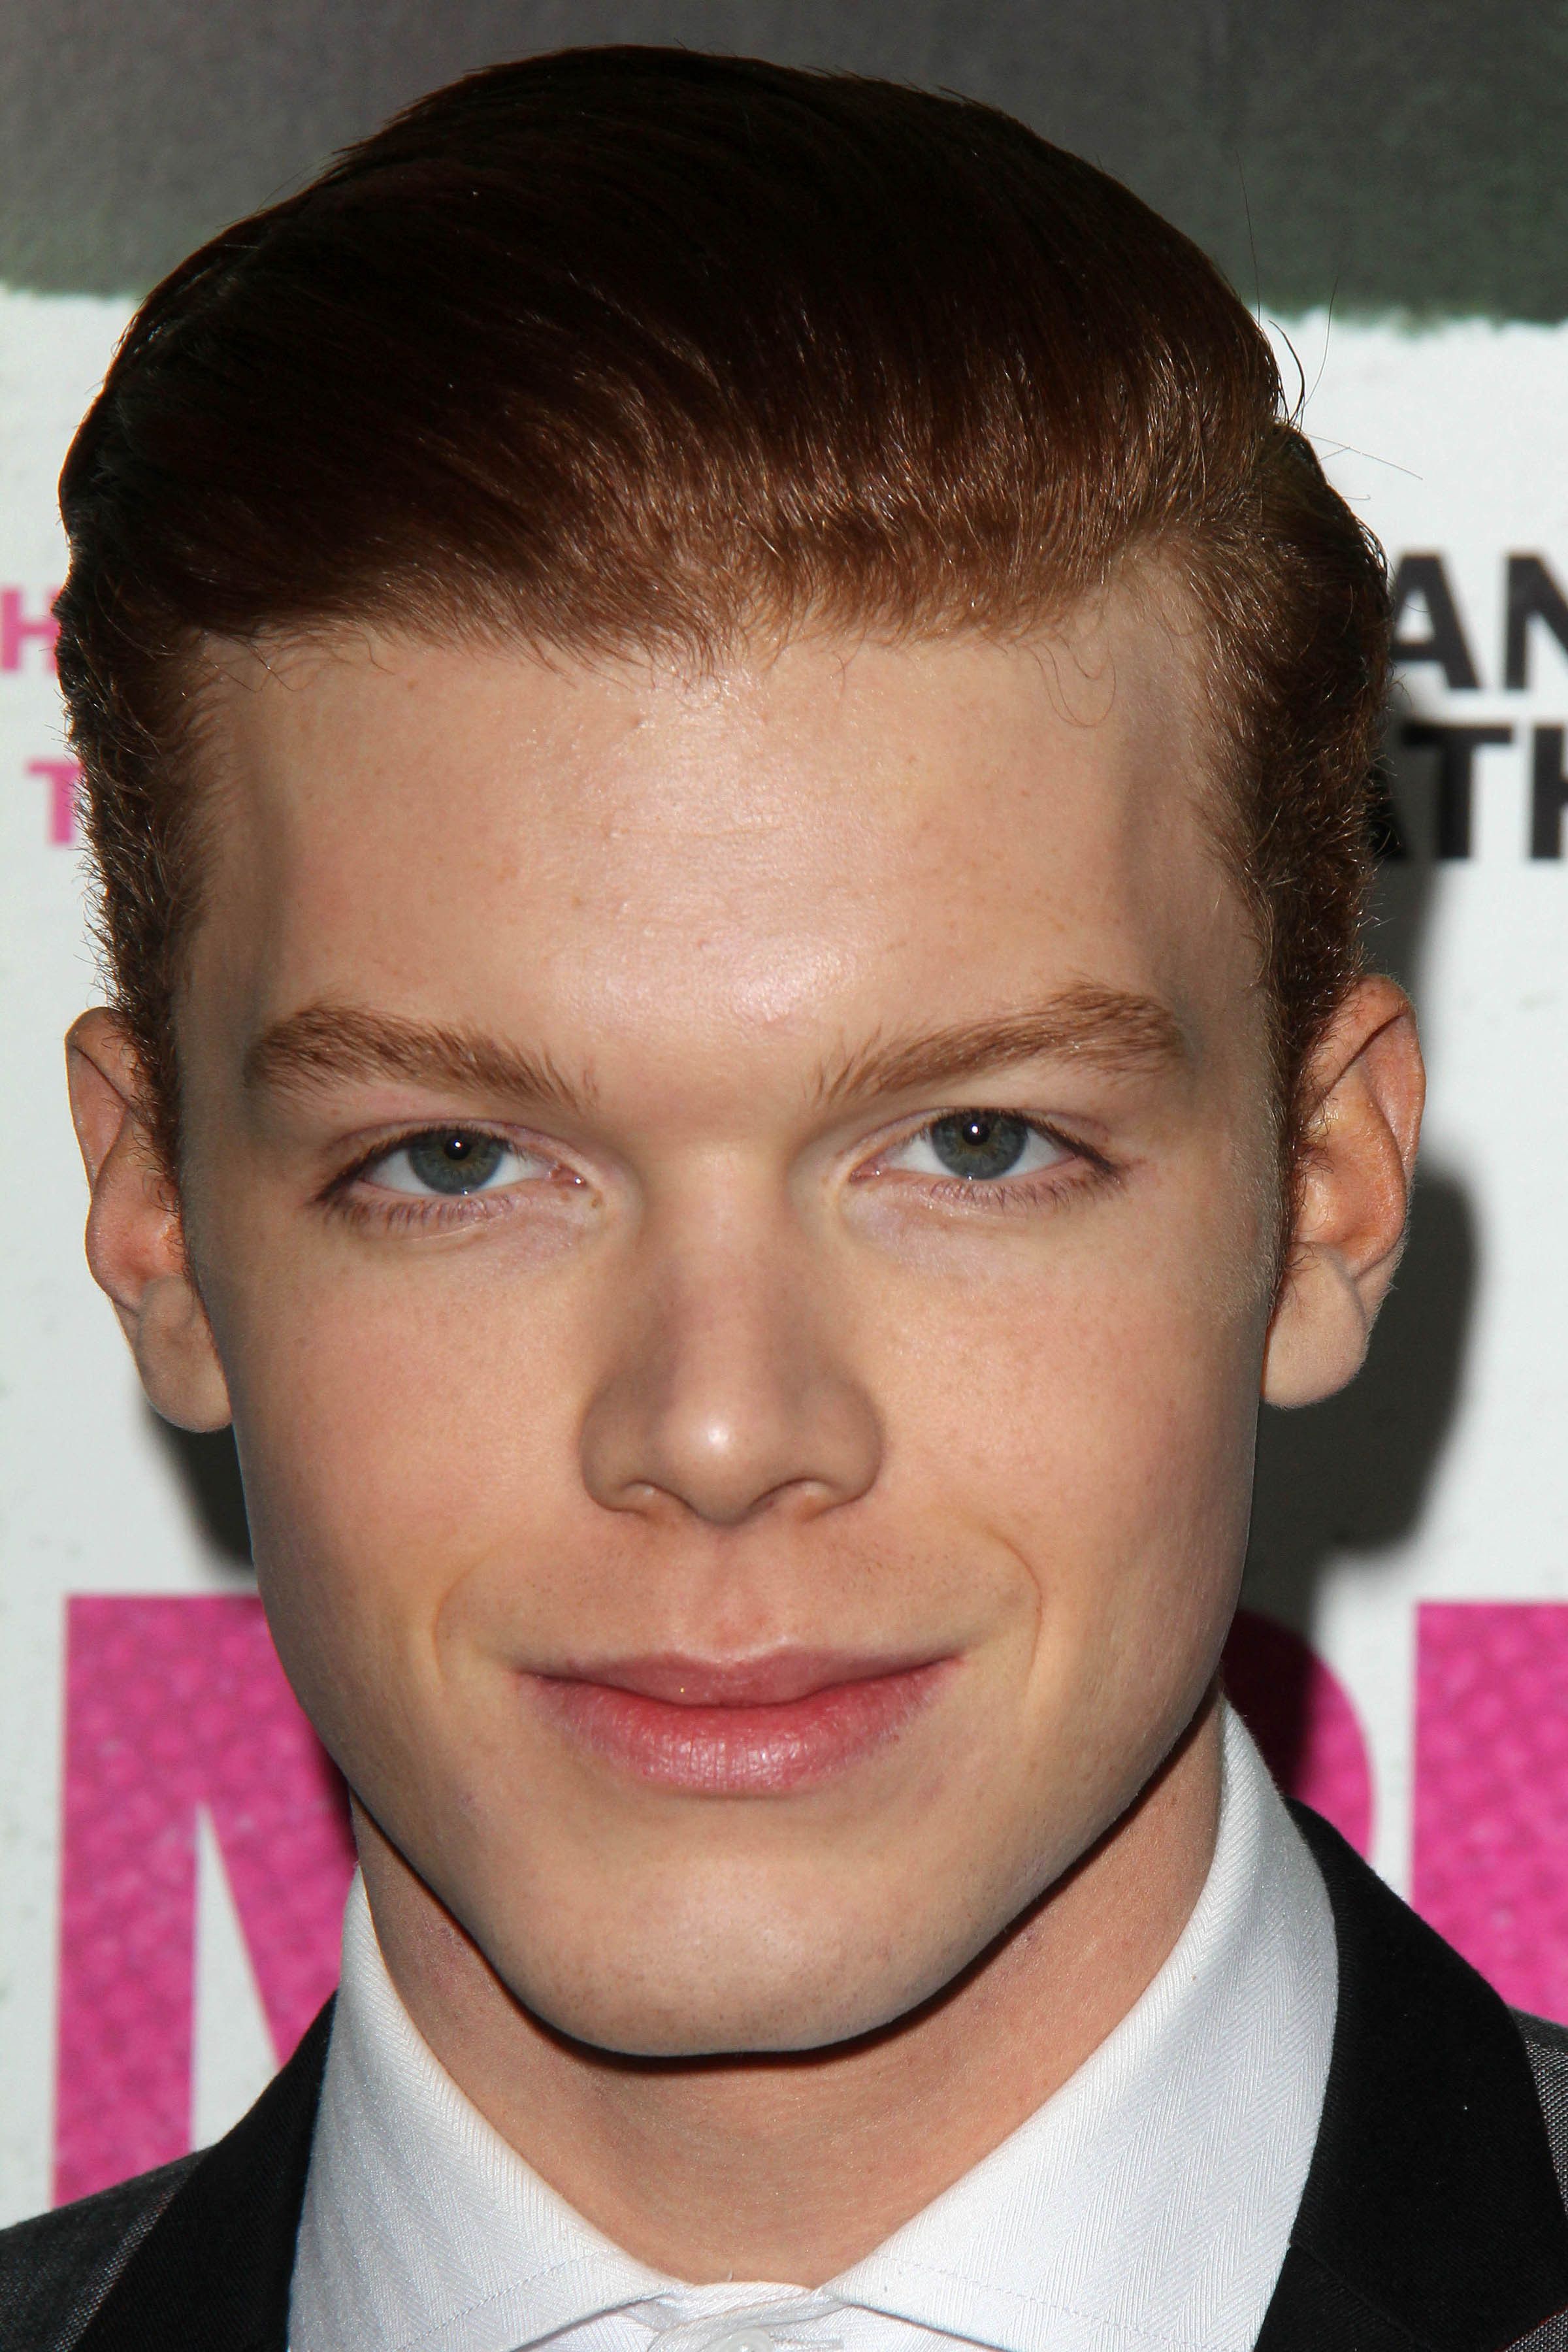 Cameron Monaghan smiles in a white collared shirt and blazer.